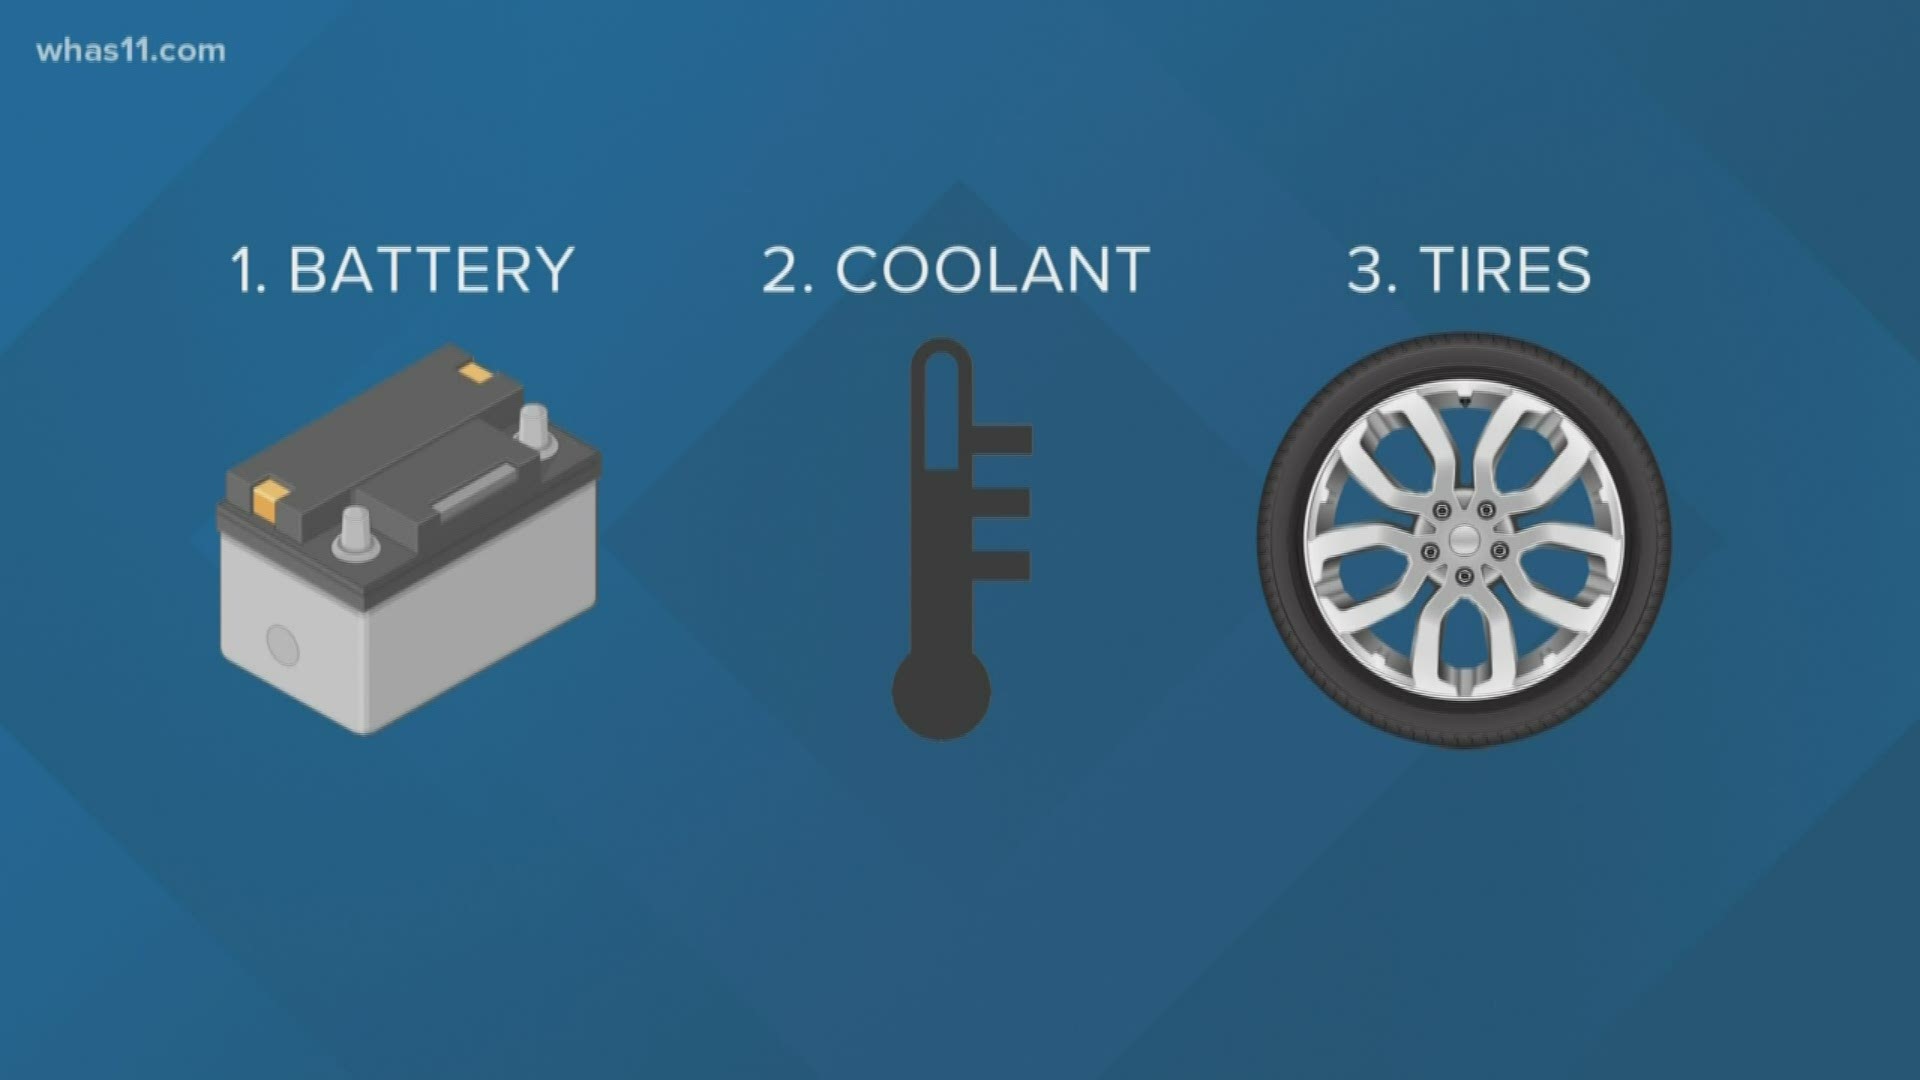 Make sure to check battery, coolant and tires in cold weather.